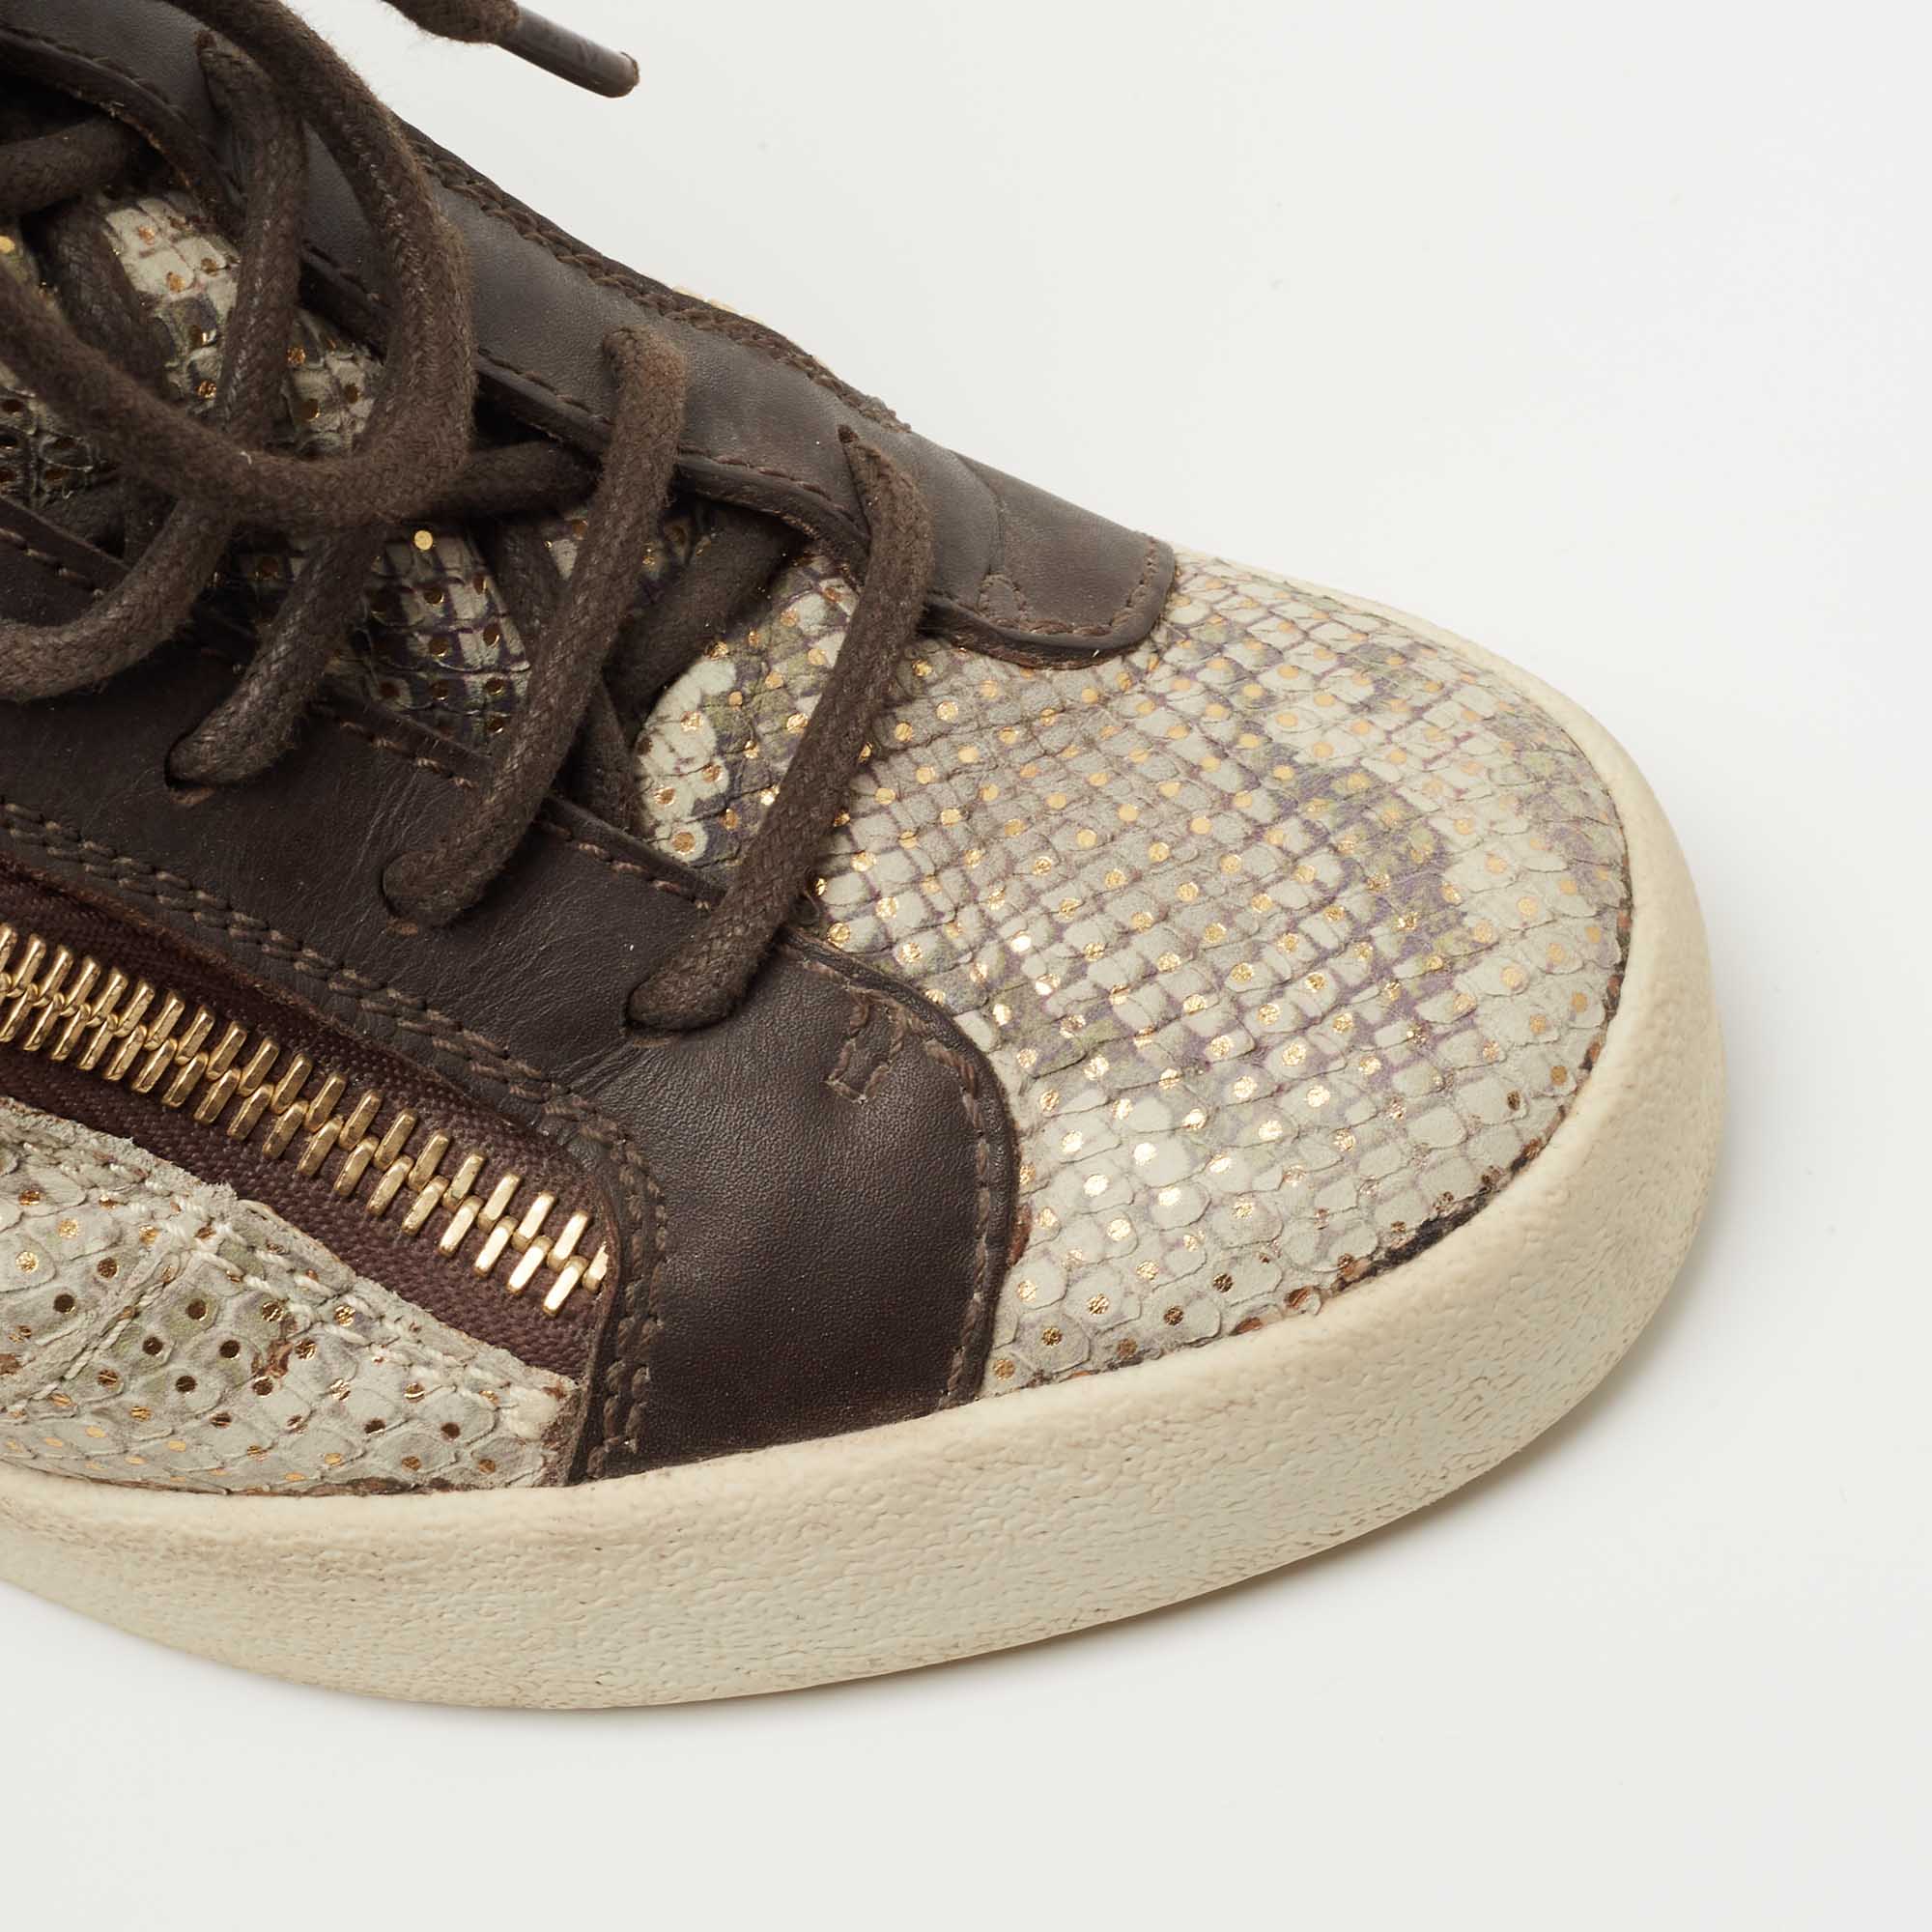 Giuseppe Zanotti Beige/Brown Embossed Python And Leather High Top Wedge Sneakers Size 38